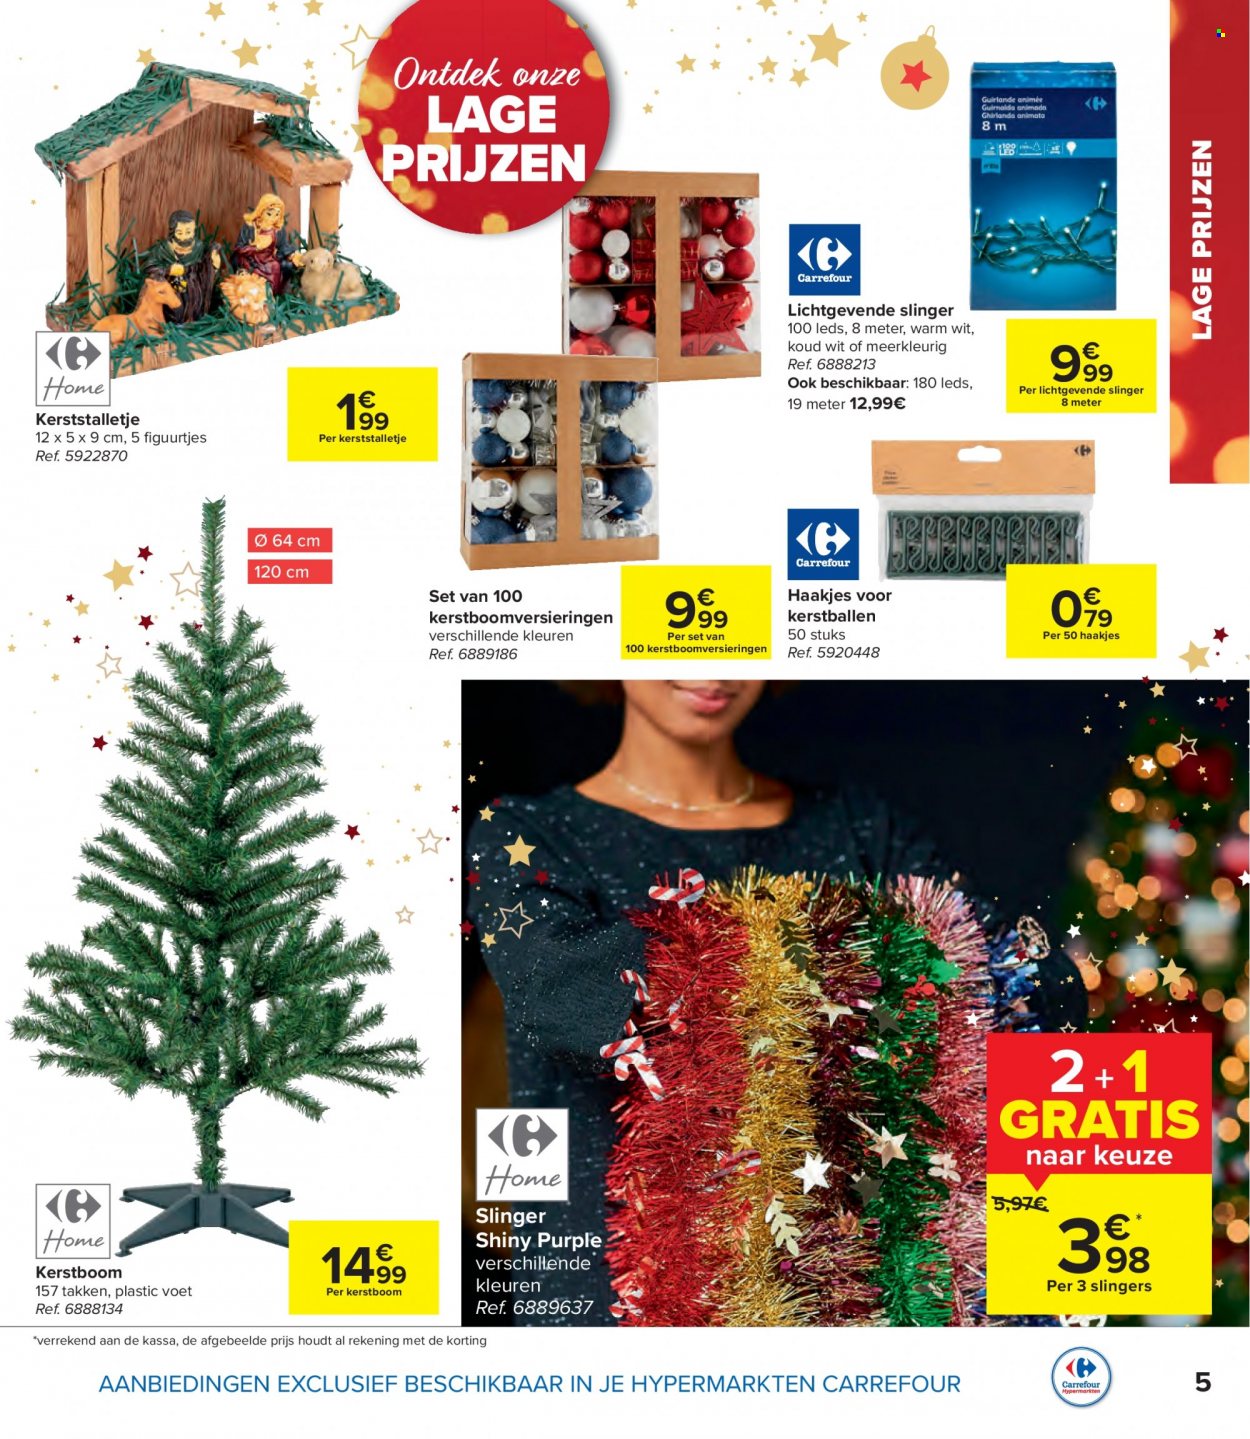 Catalogue Carrefour hypermarkt - 16.11.2022 - 31.12.2022. Page 5.